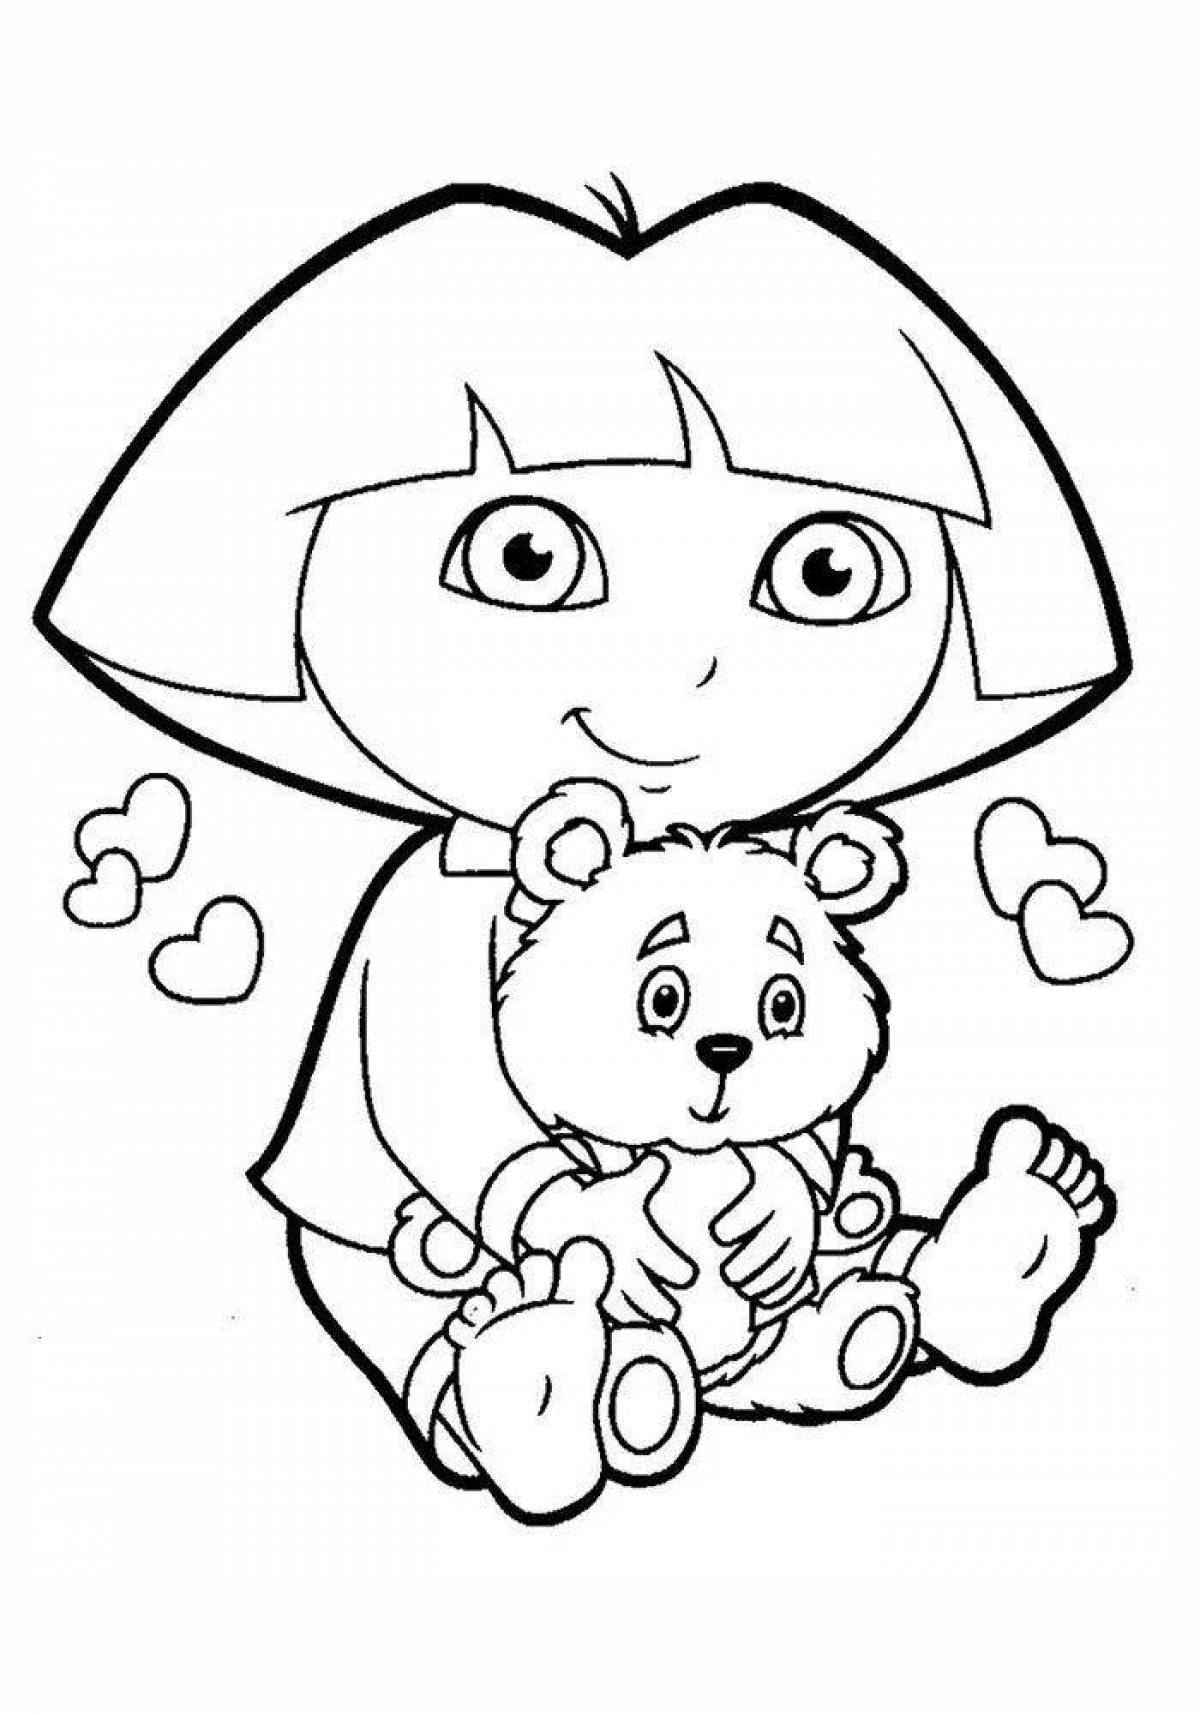 Sparkling cartoon coloring pages for girls